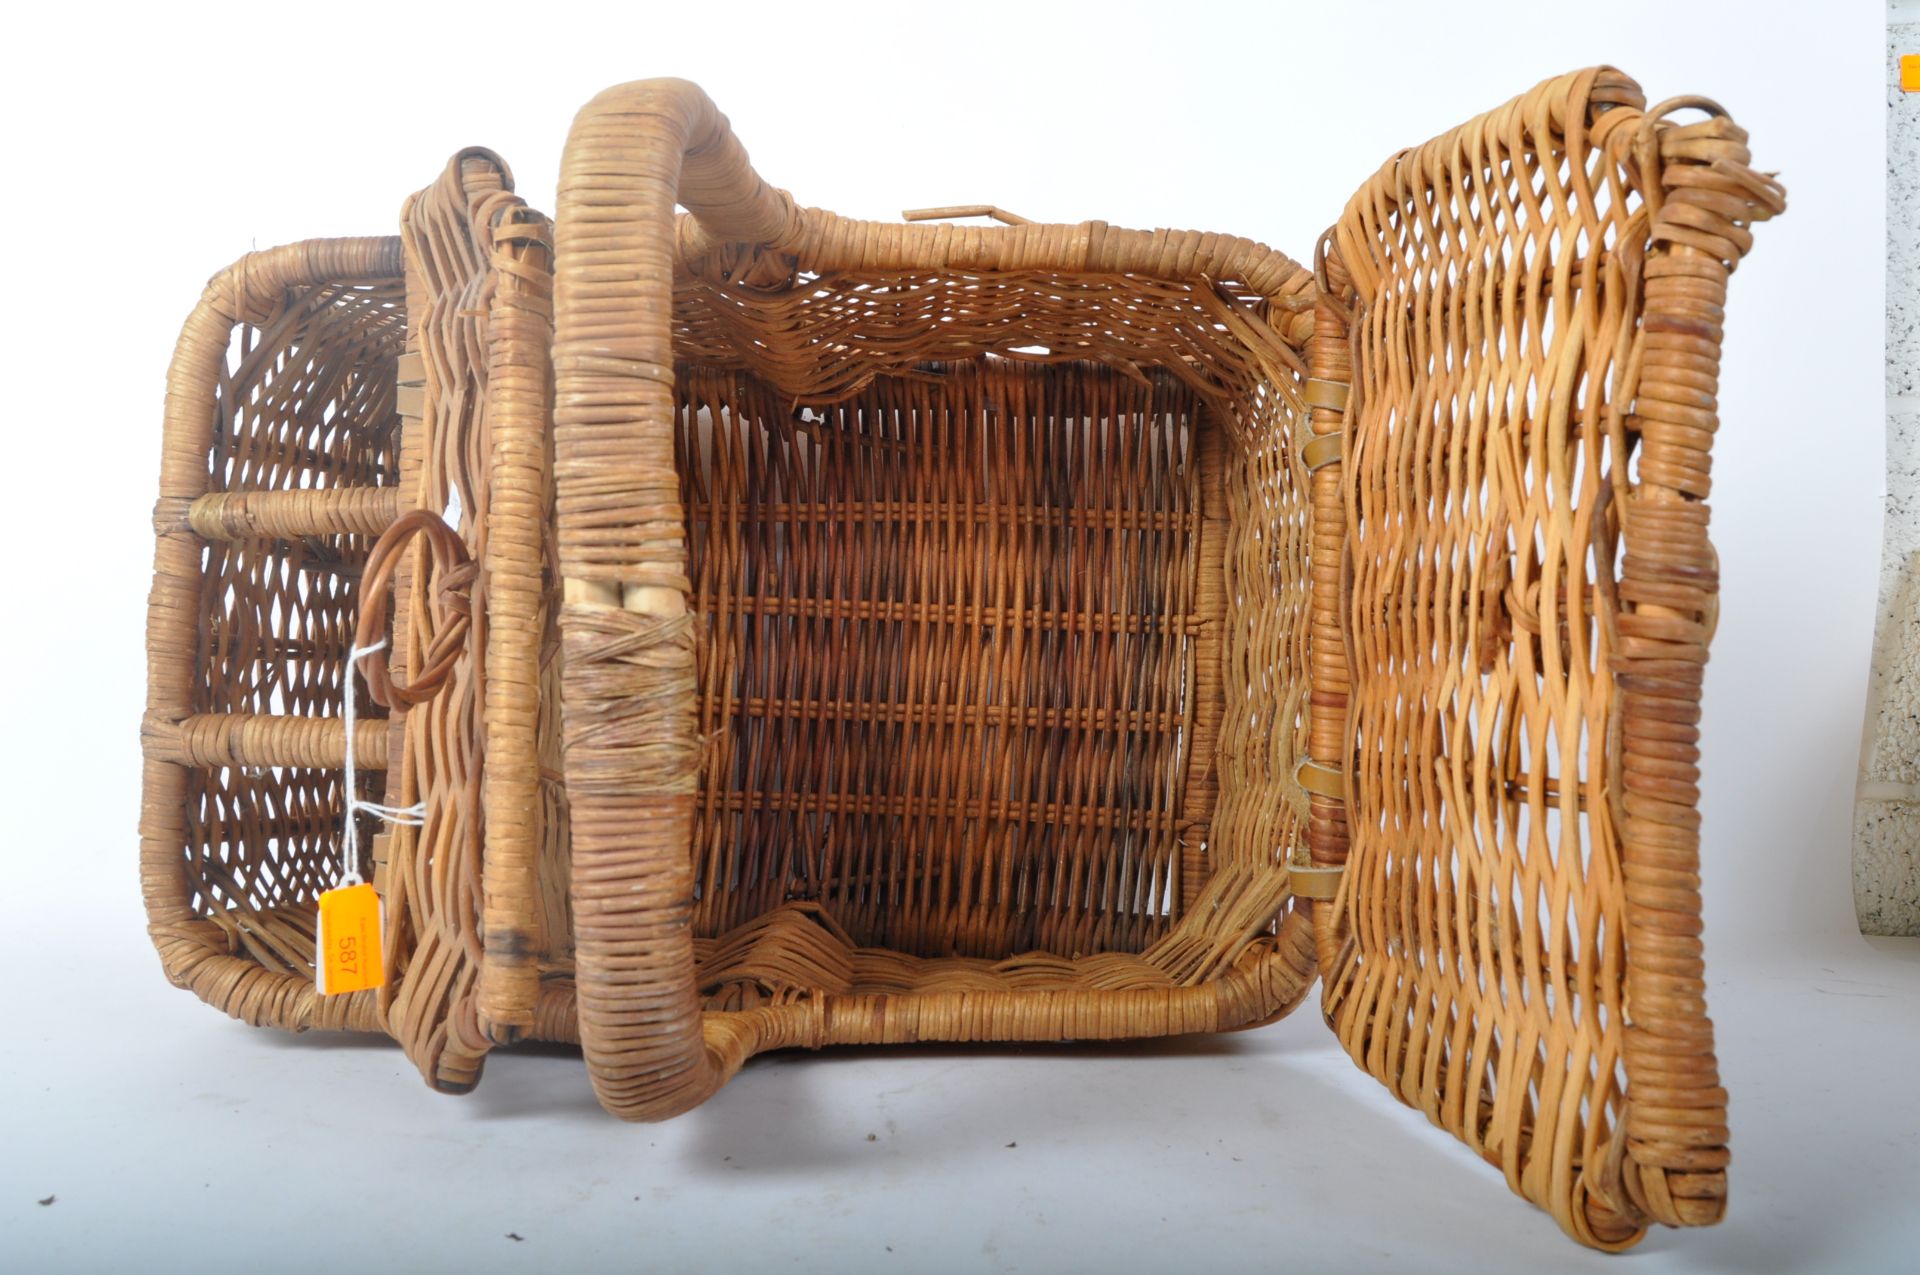 MID 20TH CENTURY WICKER WOVEN PICNIC BASKET - Image 3 of 5